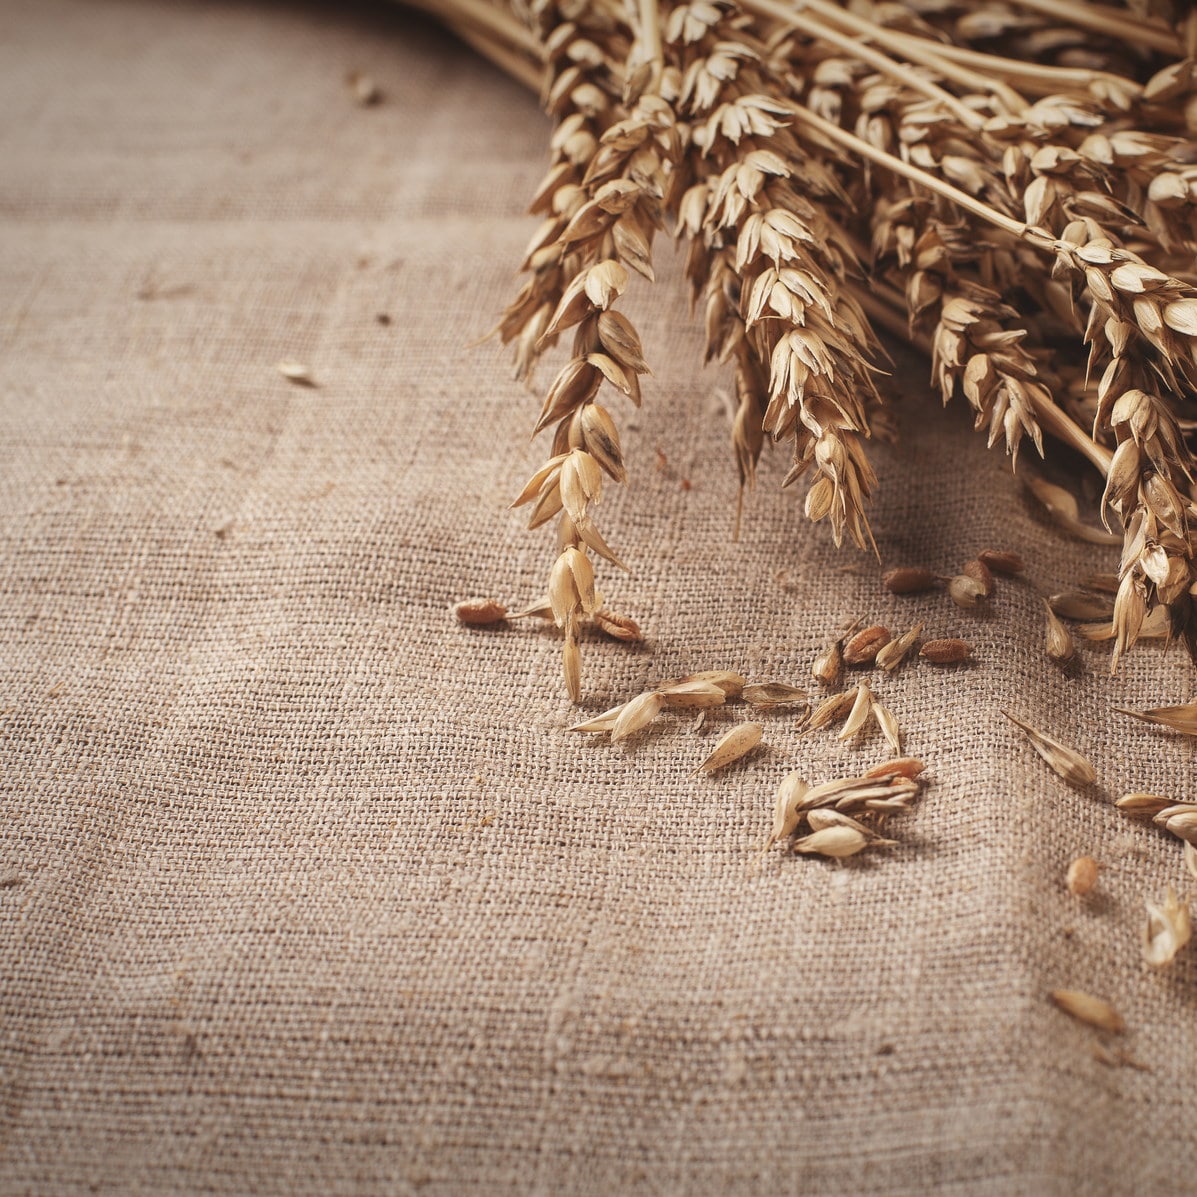 Jute: An Extremely Eco-Friendly Fabric - The Modest Man